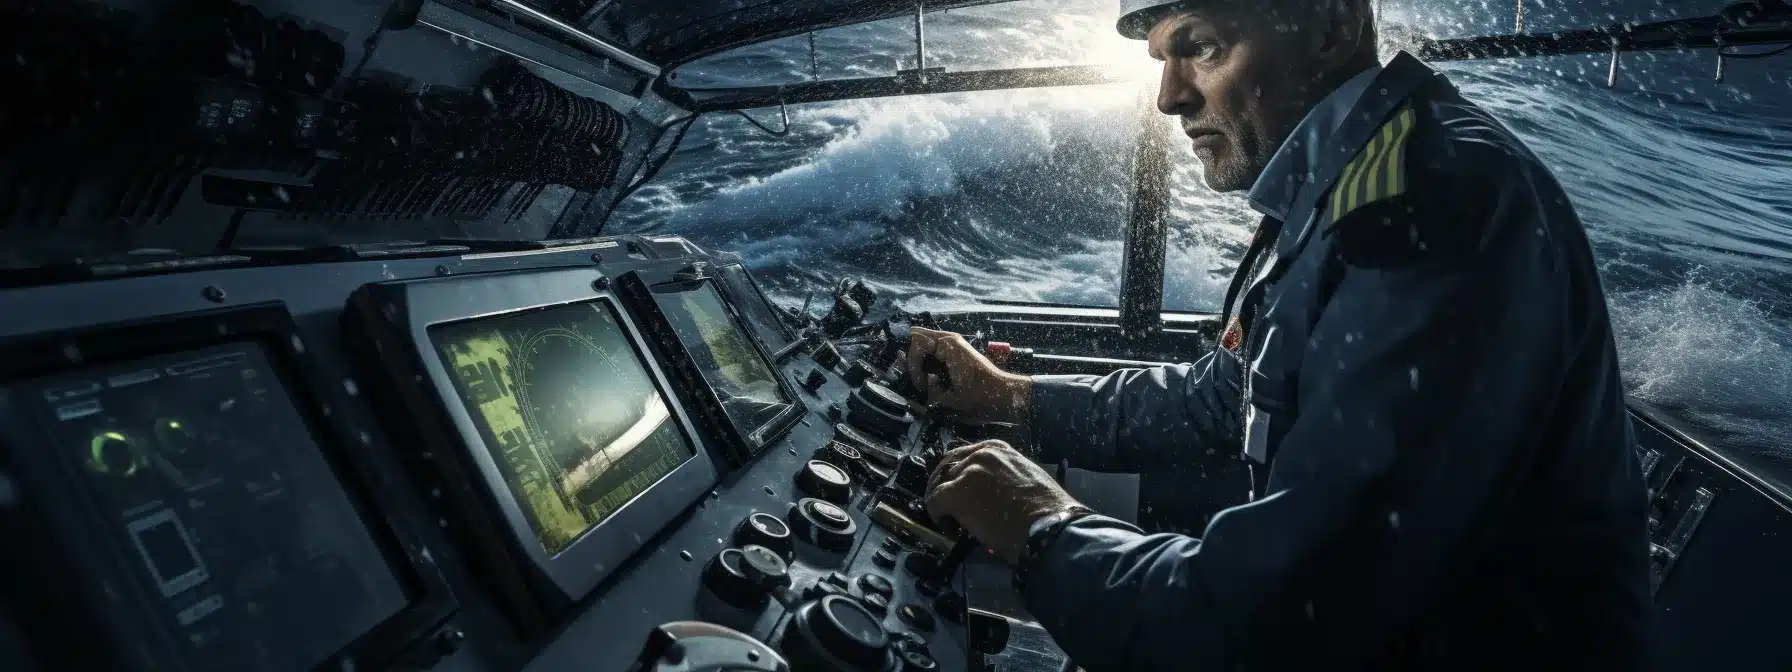 A Captain Steering A Magnificent Ship Through The Waves, Using A Compass And Chart To Navigate Towards Success While Keeping An Eye On Potential Hazards And Opportunities Ahead.